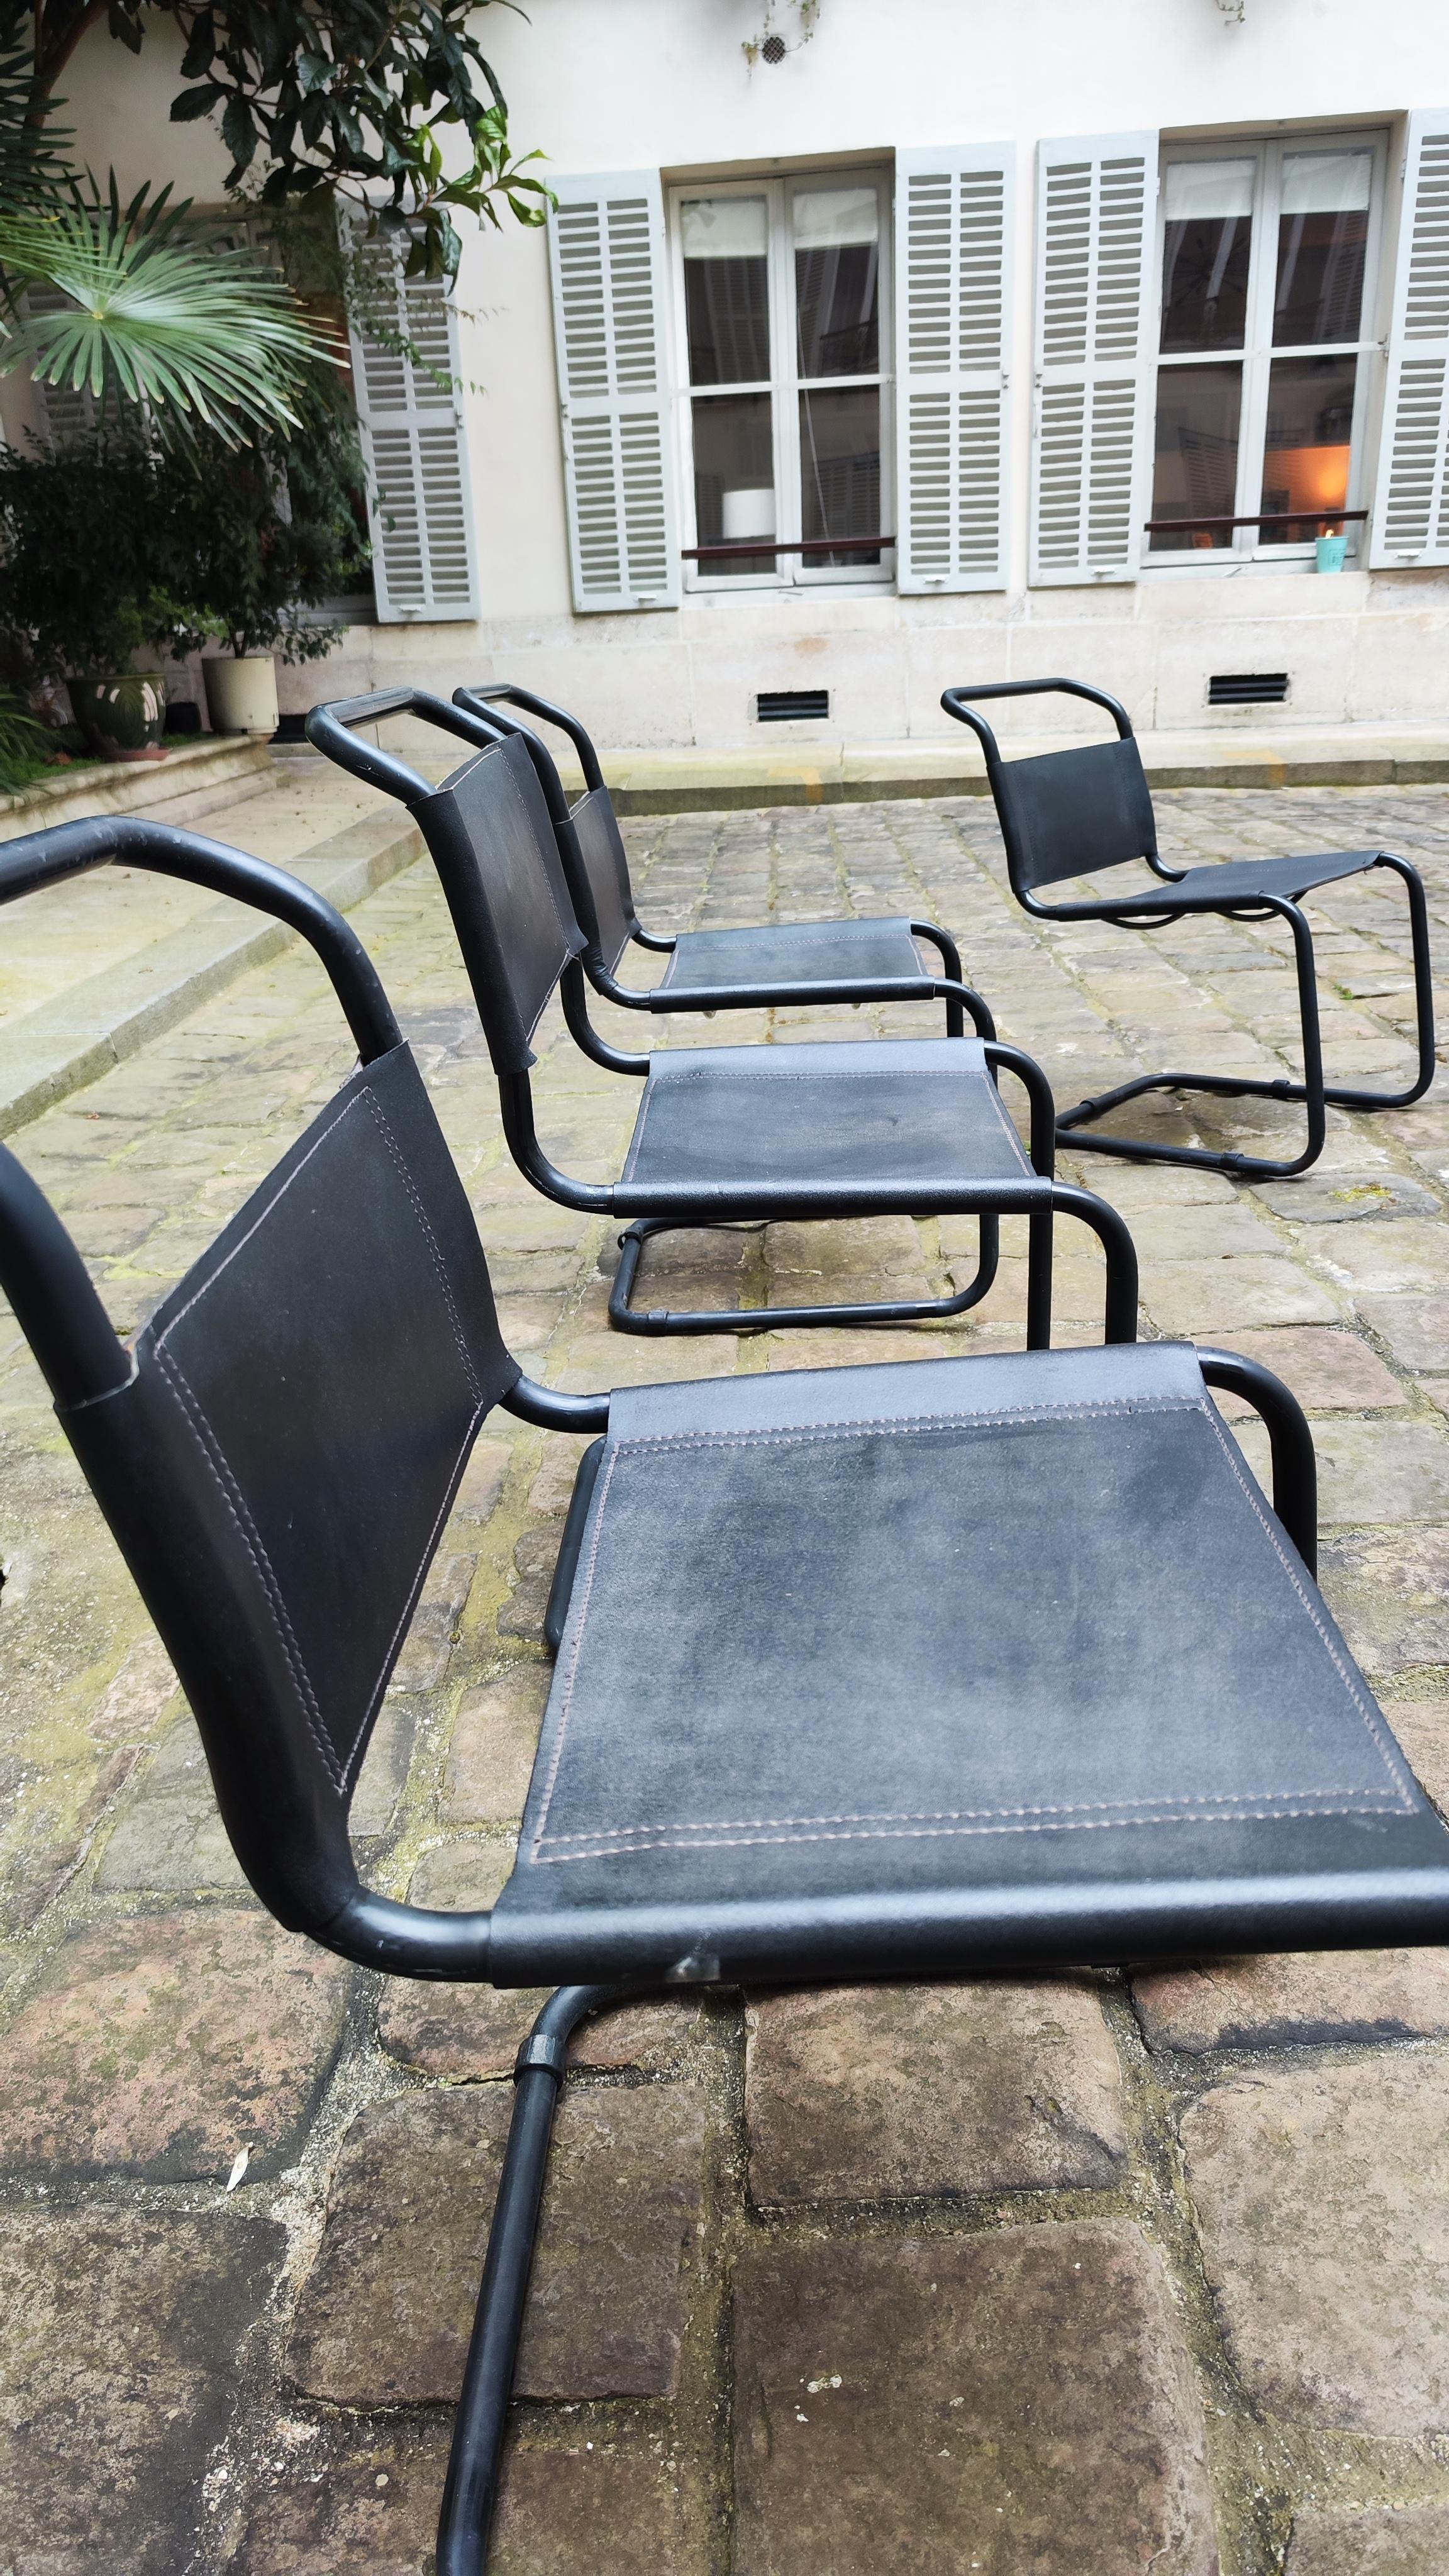 4 B33 MART STAM CANTILEVER CHAIRS AND 1 S34 ARMCHAIR - 80s  - 1980 In Distressed Condition For Sale In Paris, FR